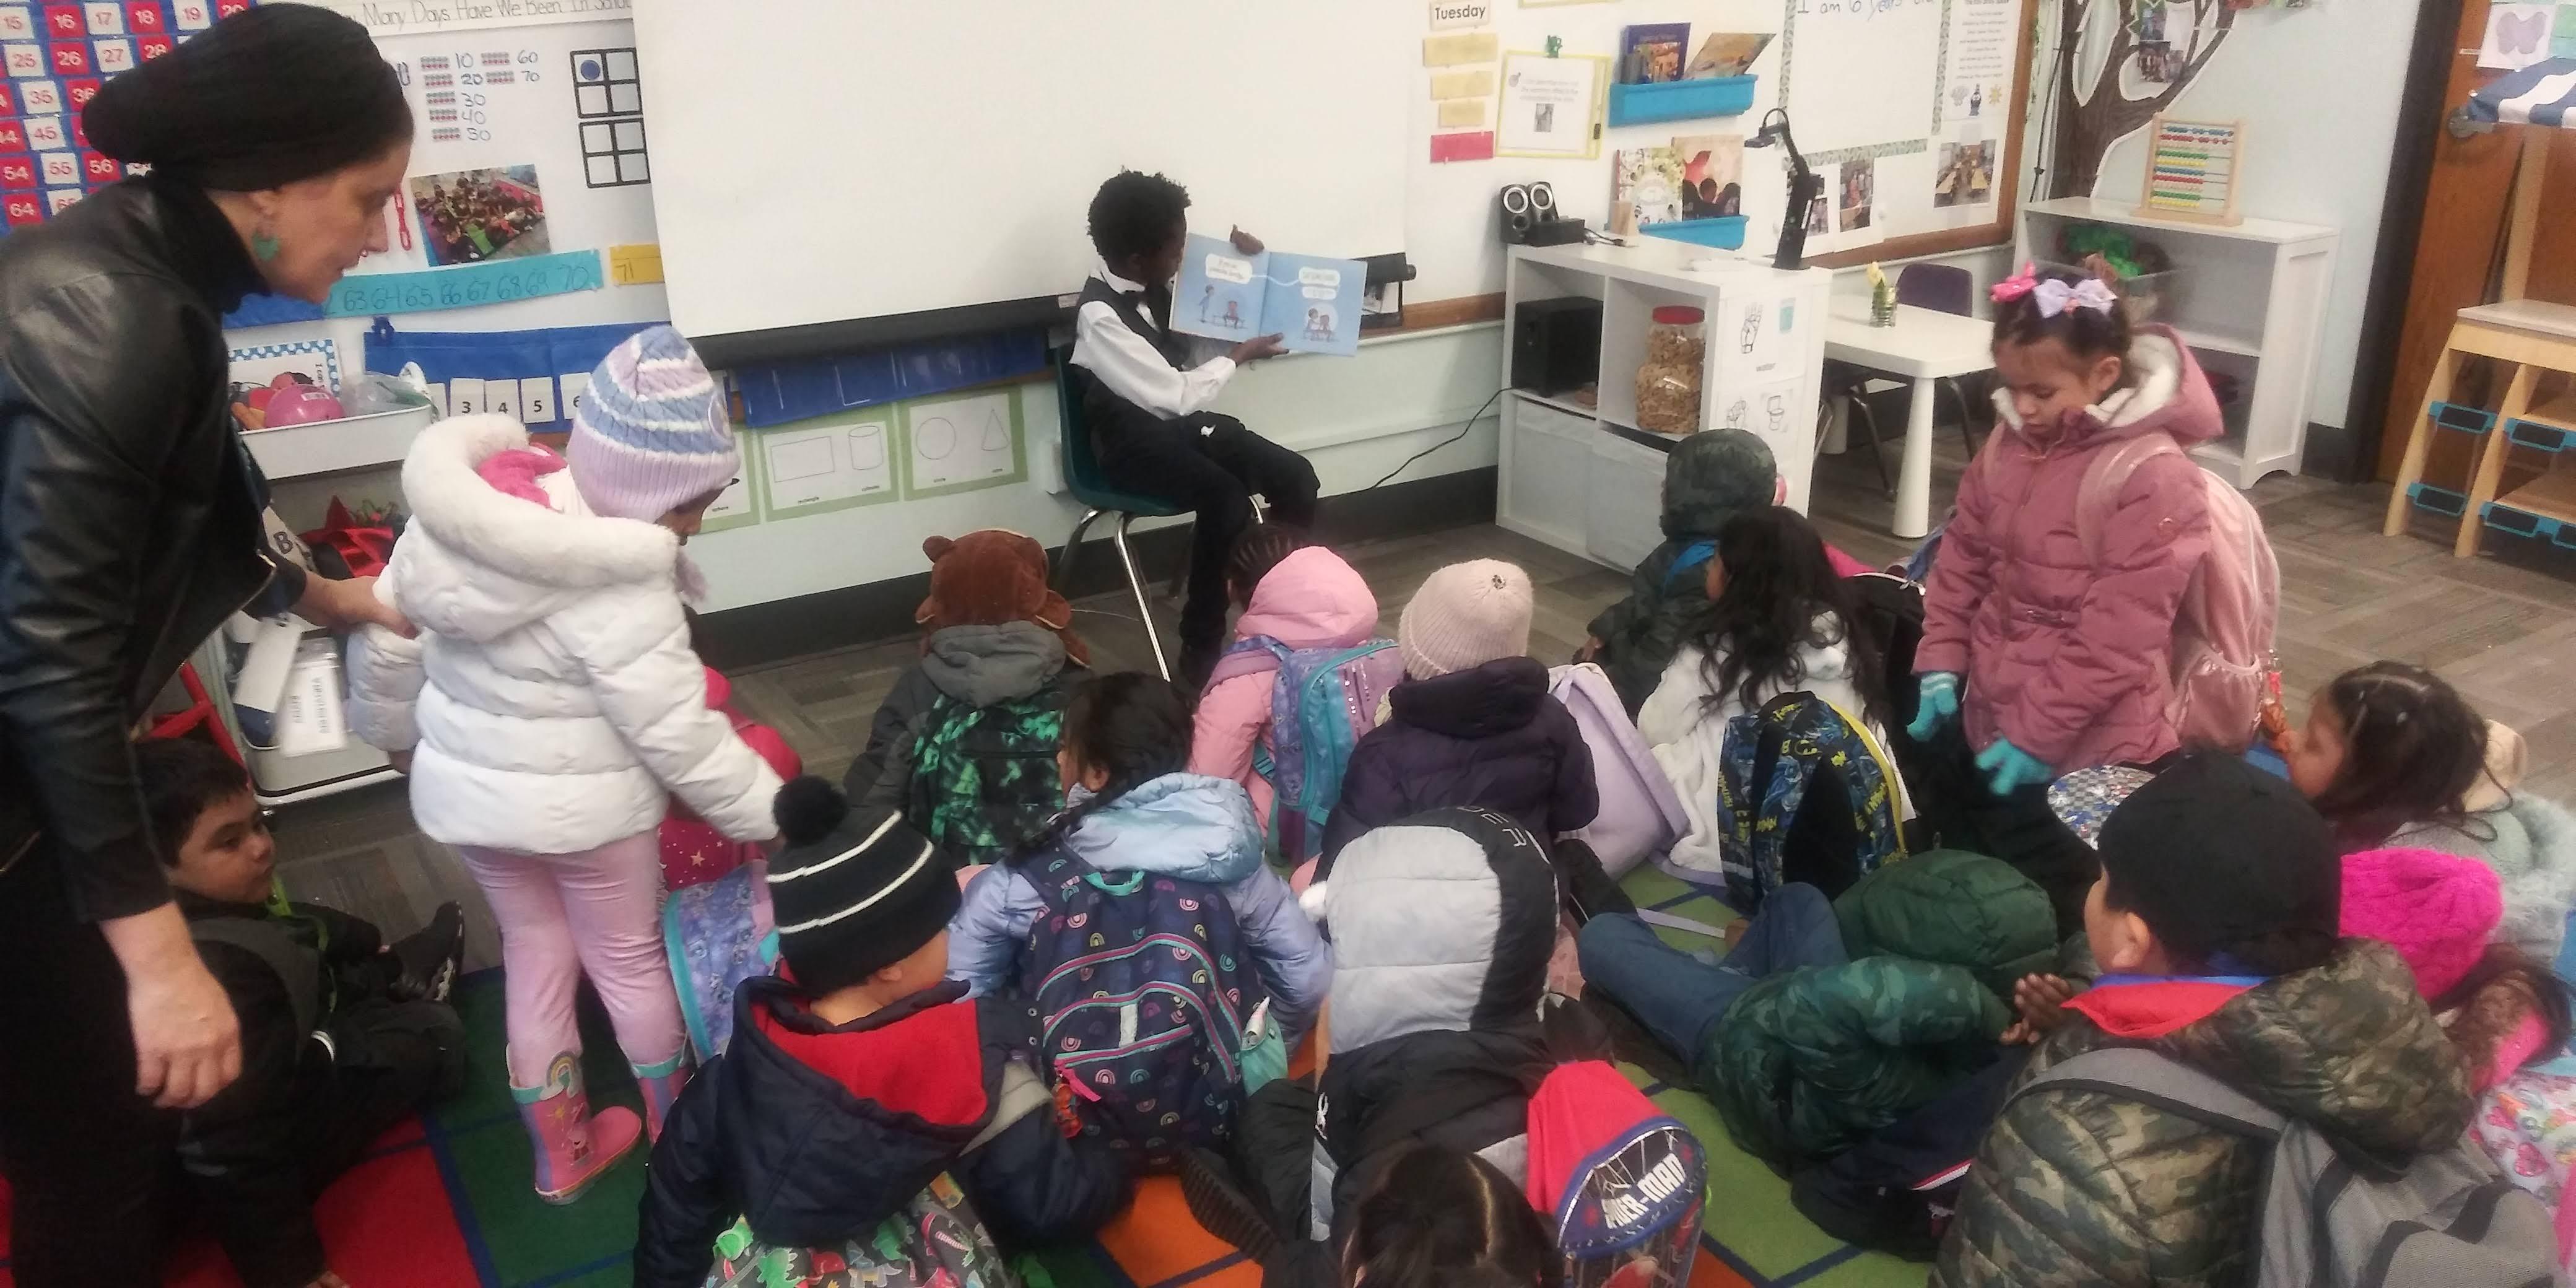 Middle schoolers reading to elementary children